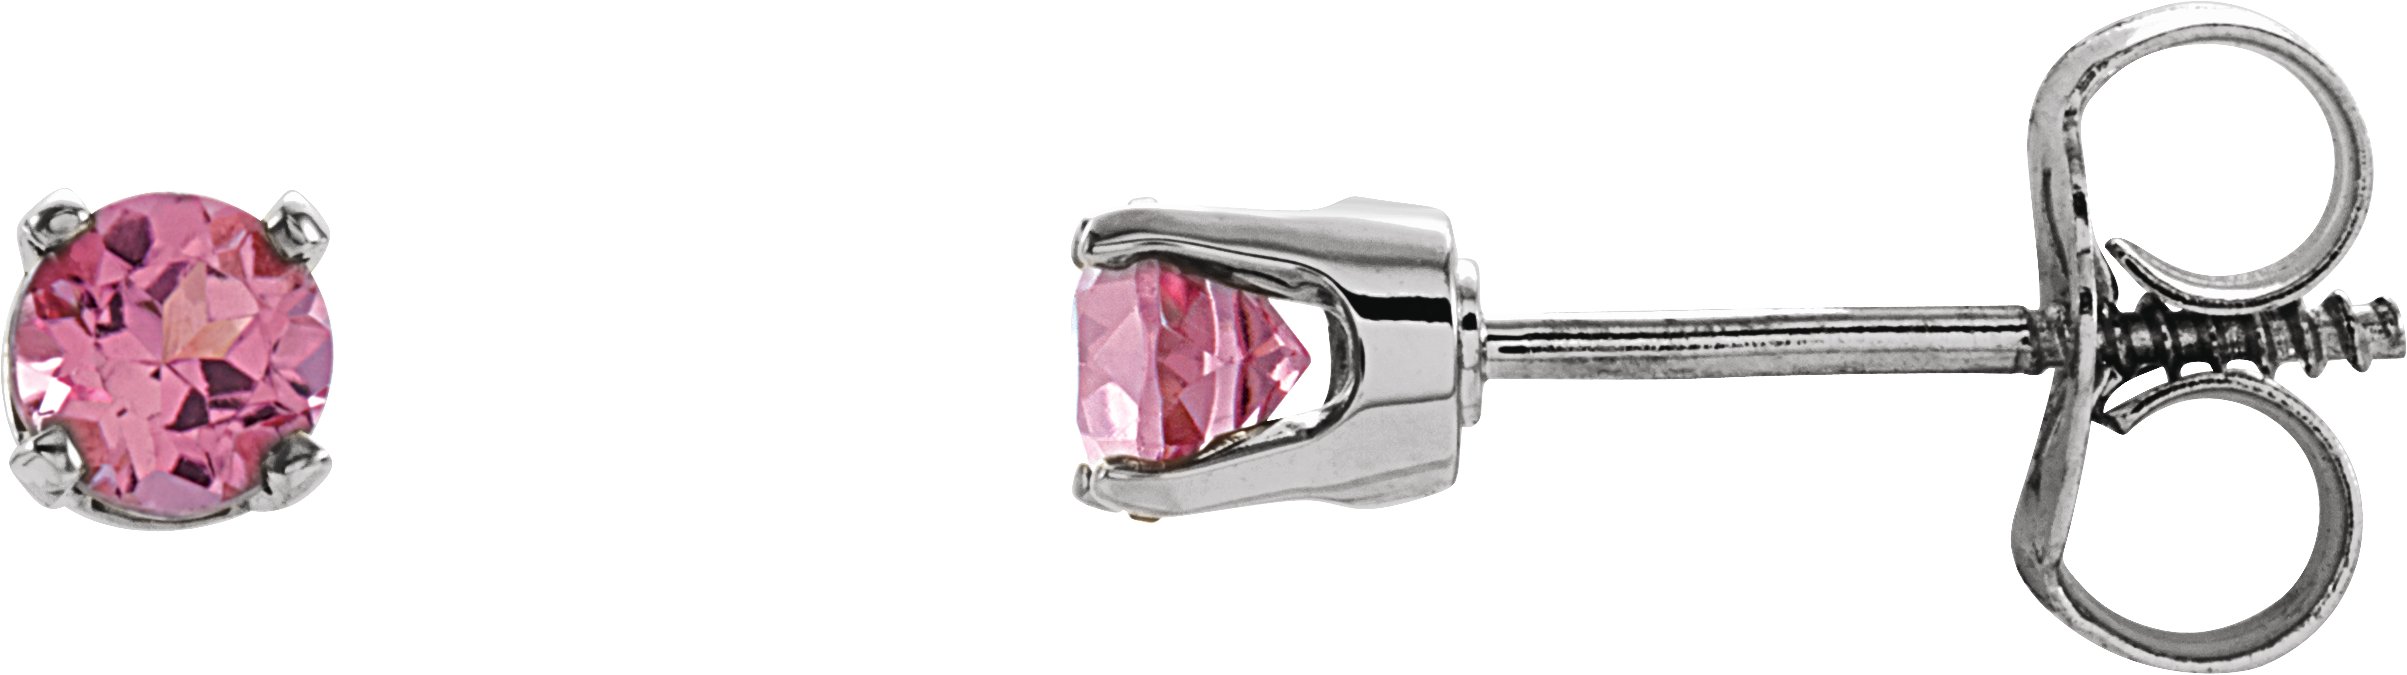 Sterling Silver Imitation Pink Tourmaline Youth Earrings